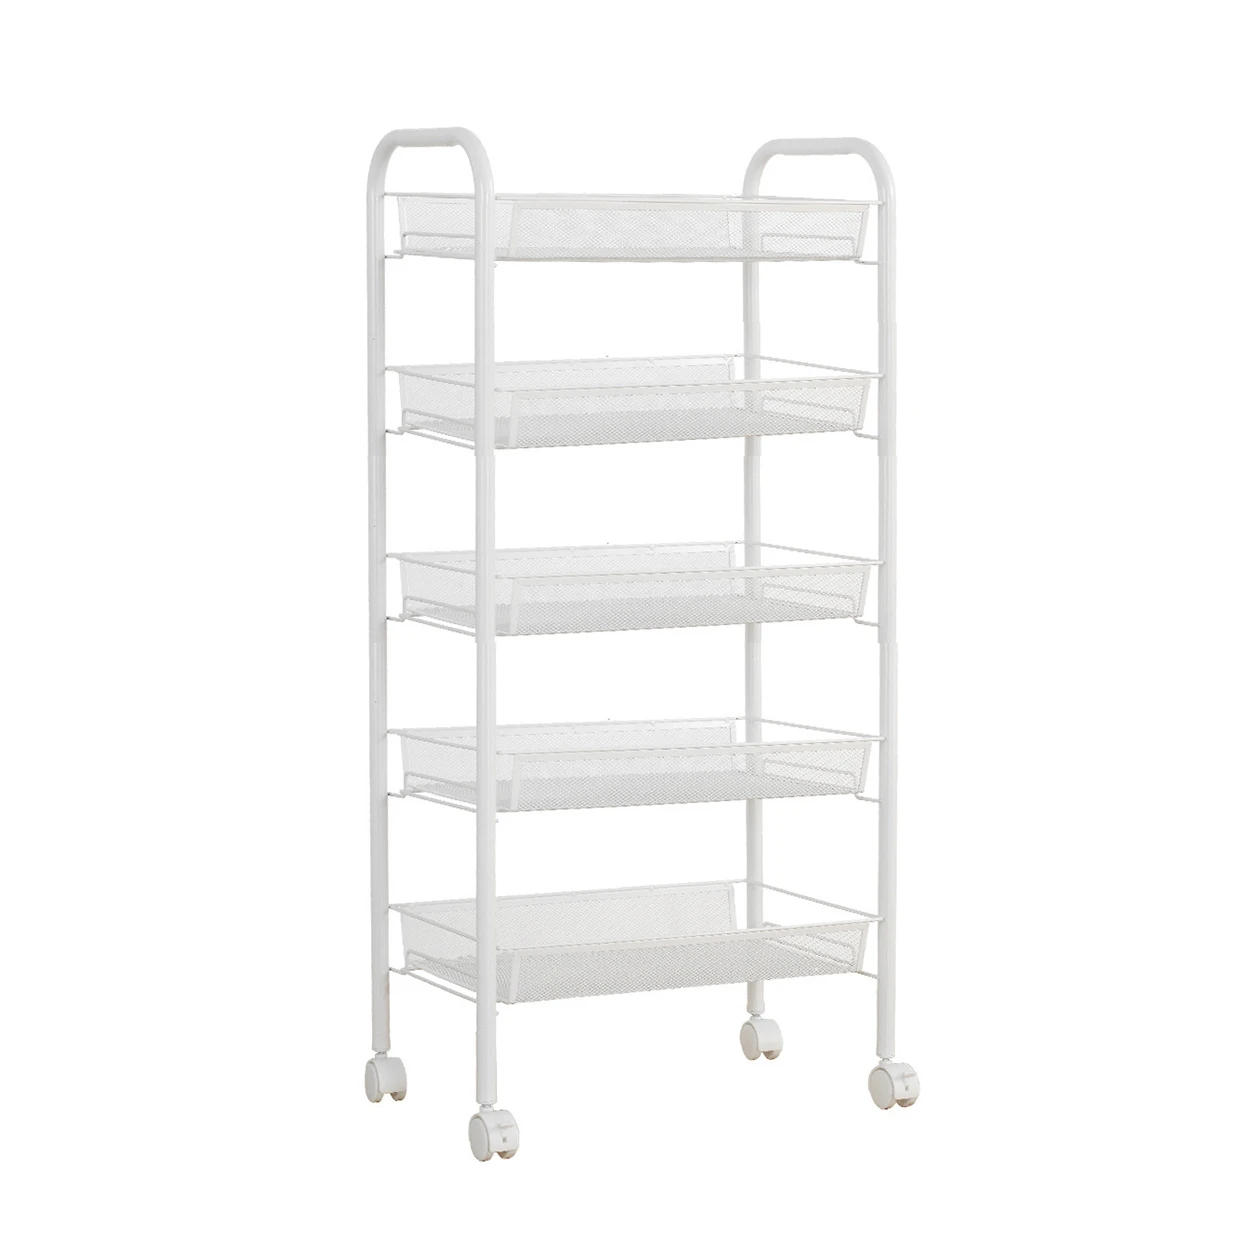 Image SDFC White Metal Mesh Rolling Cart Storage Rack Shelves with Wheels for Kitchen Pantry Office Bedroom Bathroom Washroom Laundry